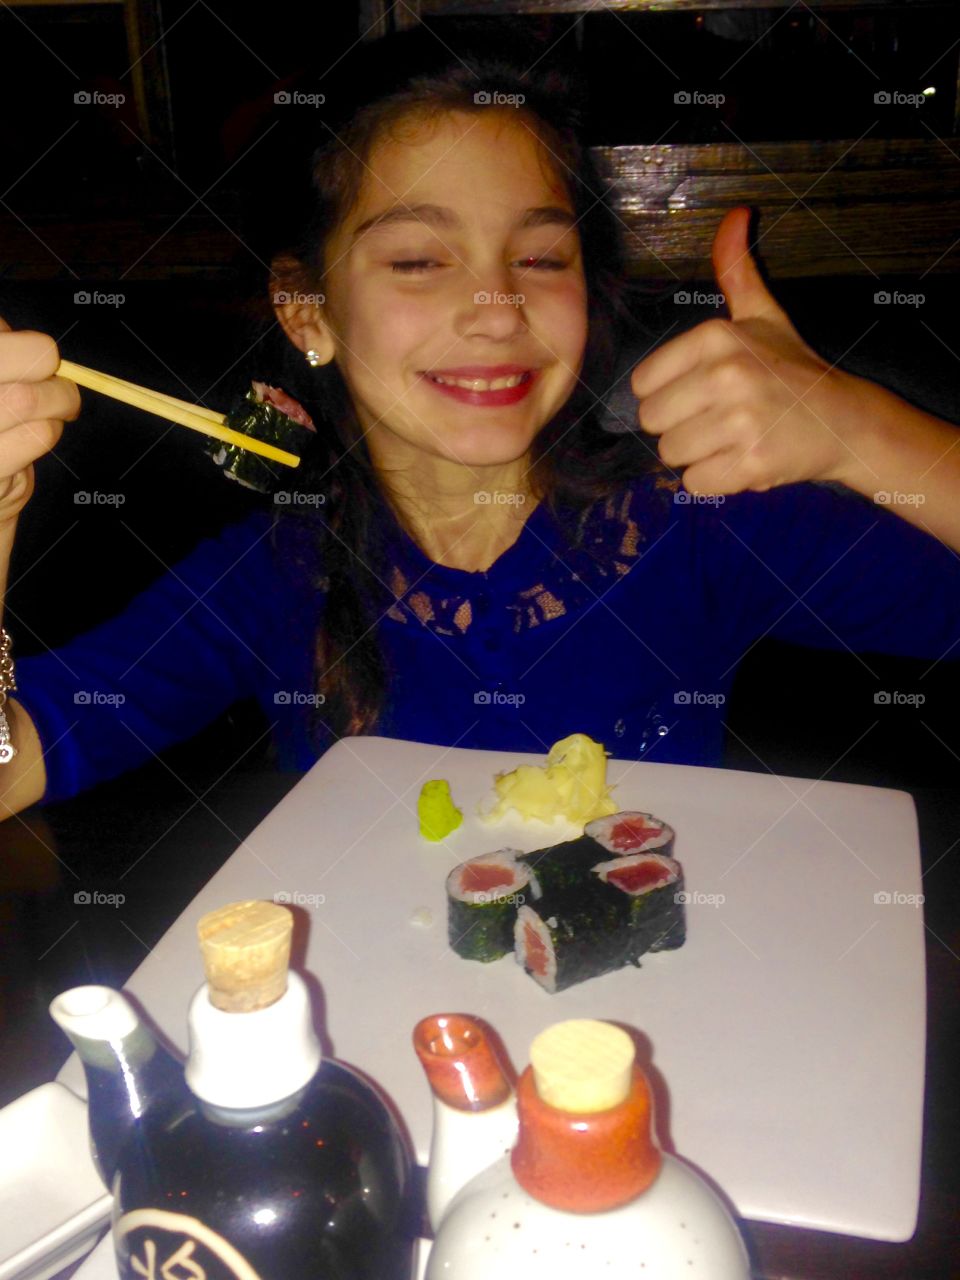 Thumbs up to sushi!